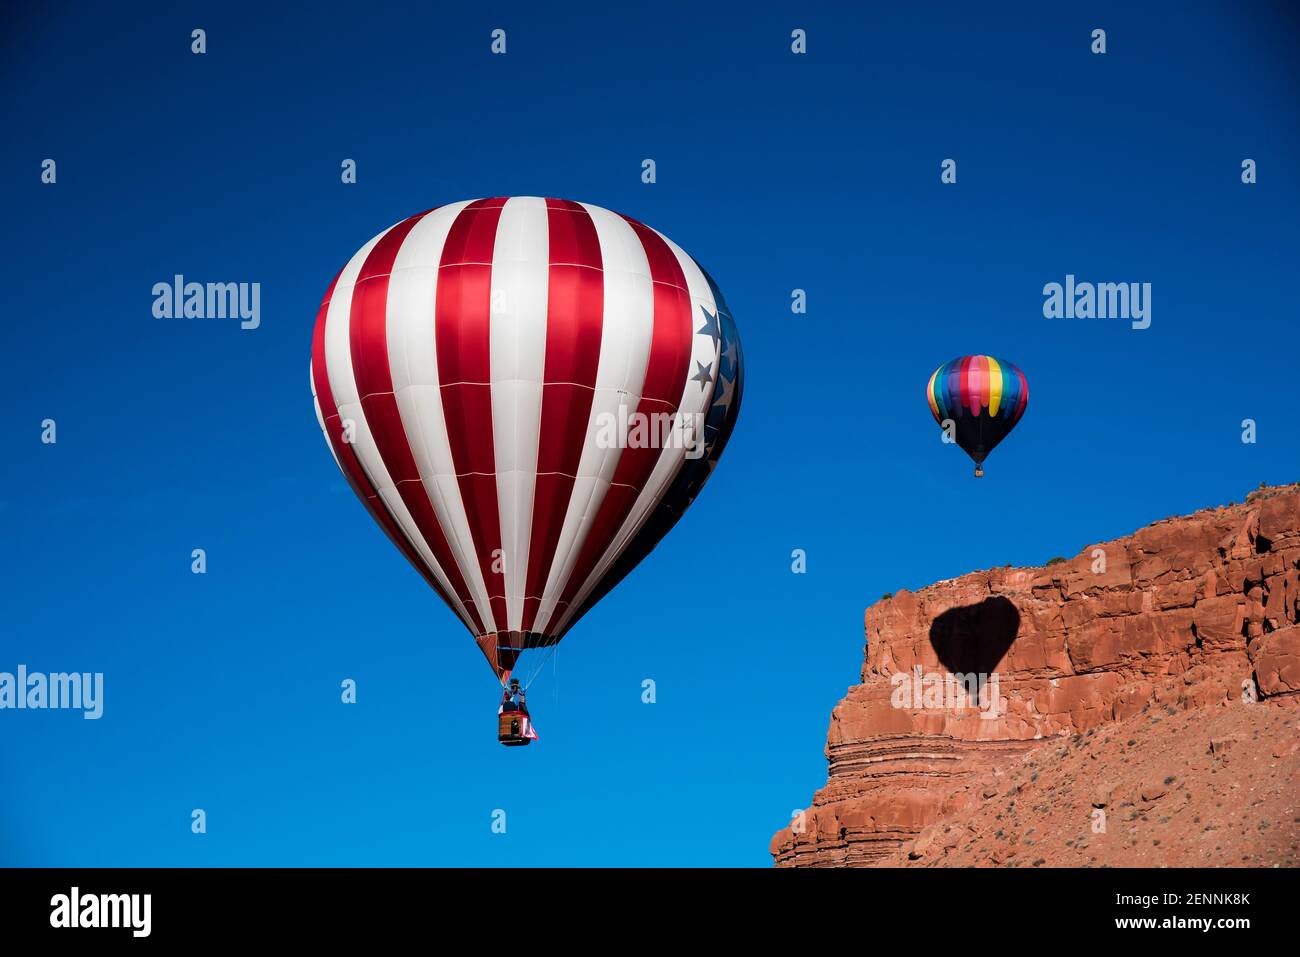 Hot air balloons in the cobalt blue skies above the red rock cliffs of Kanab, Utah, USA.  This small town is famous for its western atmosphere. Stock Photo